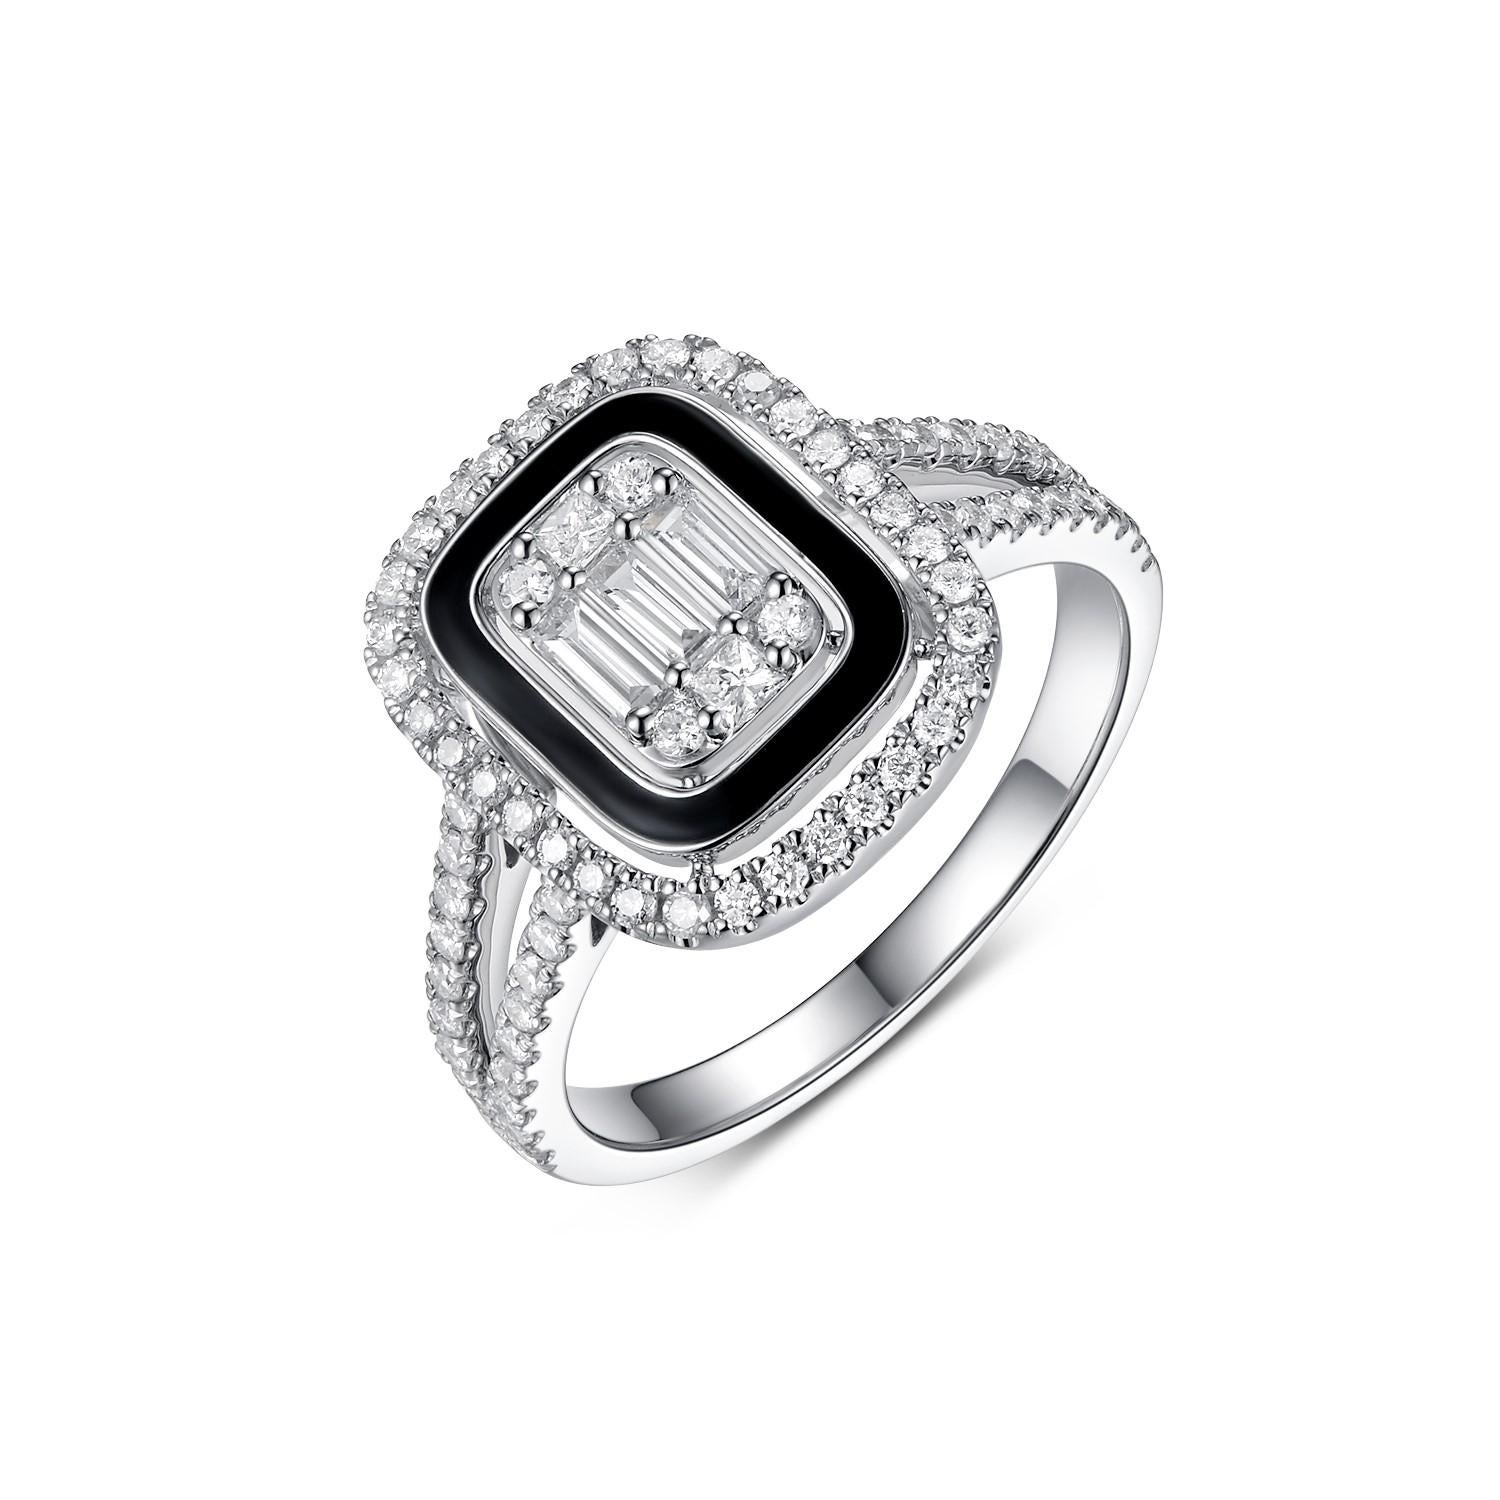 This dazzling Baguette Diamond Black Enamel Ring is a remarkable fusion of vintage flair and contemporary elegance. Crafted in lustrous 14 Karat white gold, the centerpiece of this ring is its radiant 0.19-carat baguette diamond, renowned for its